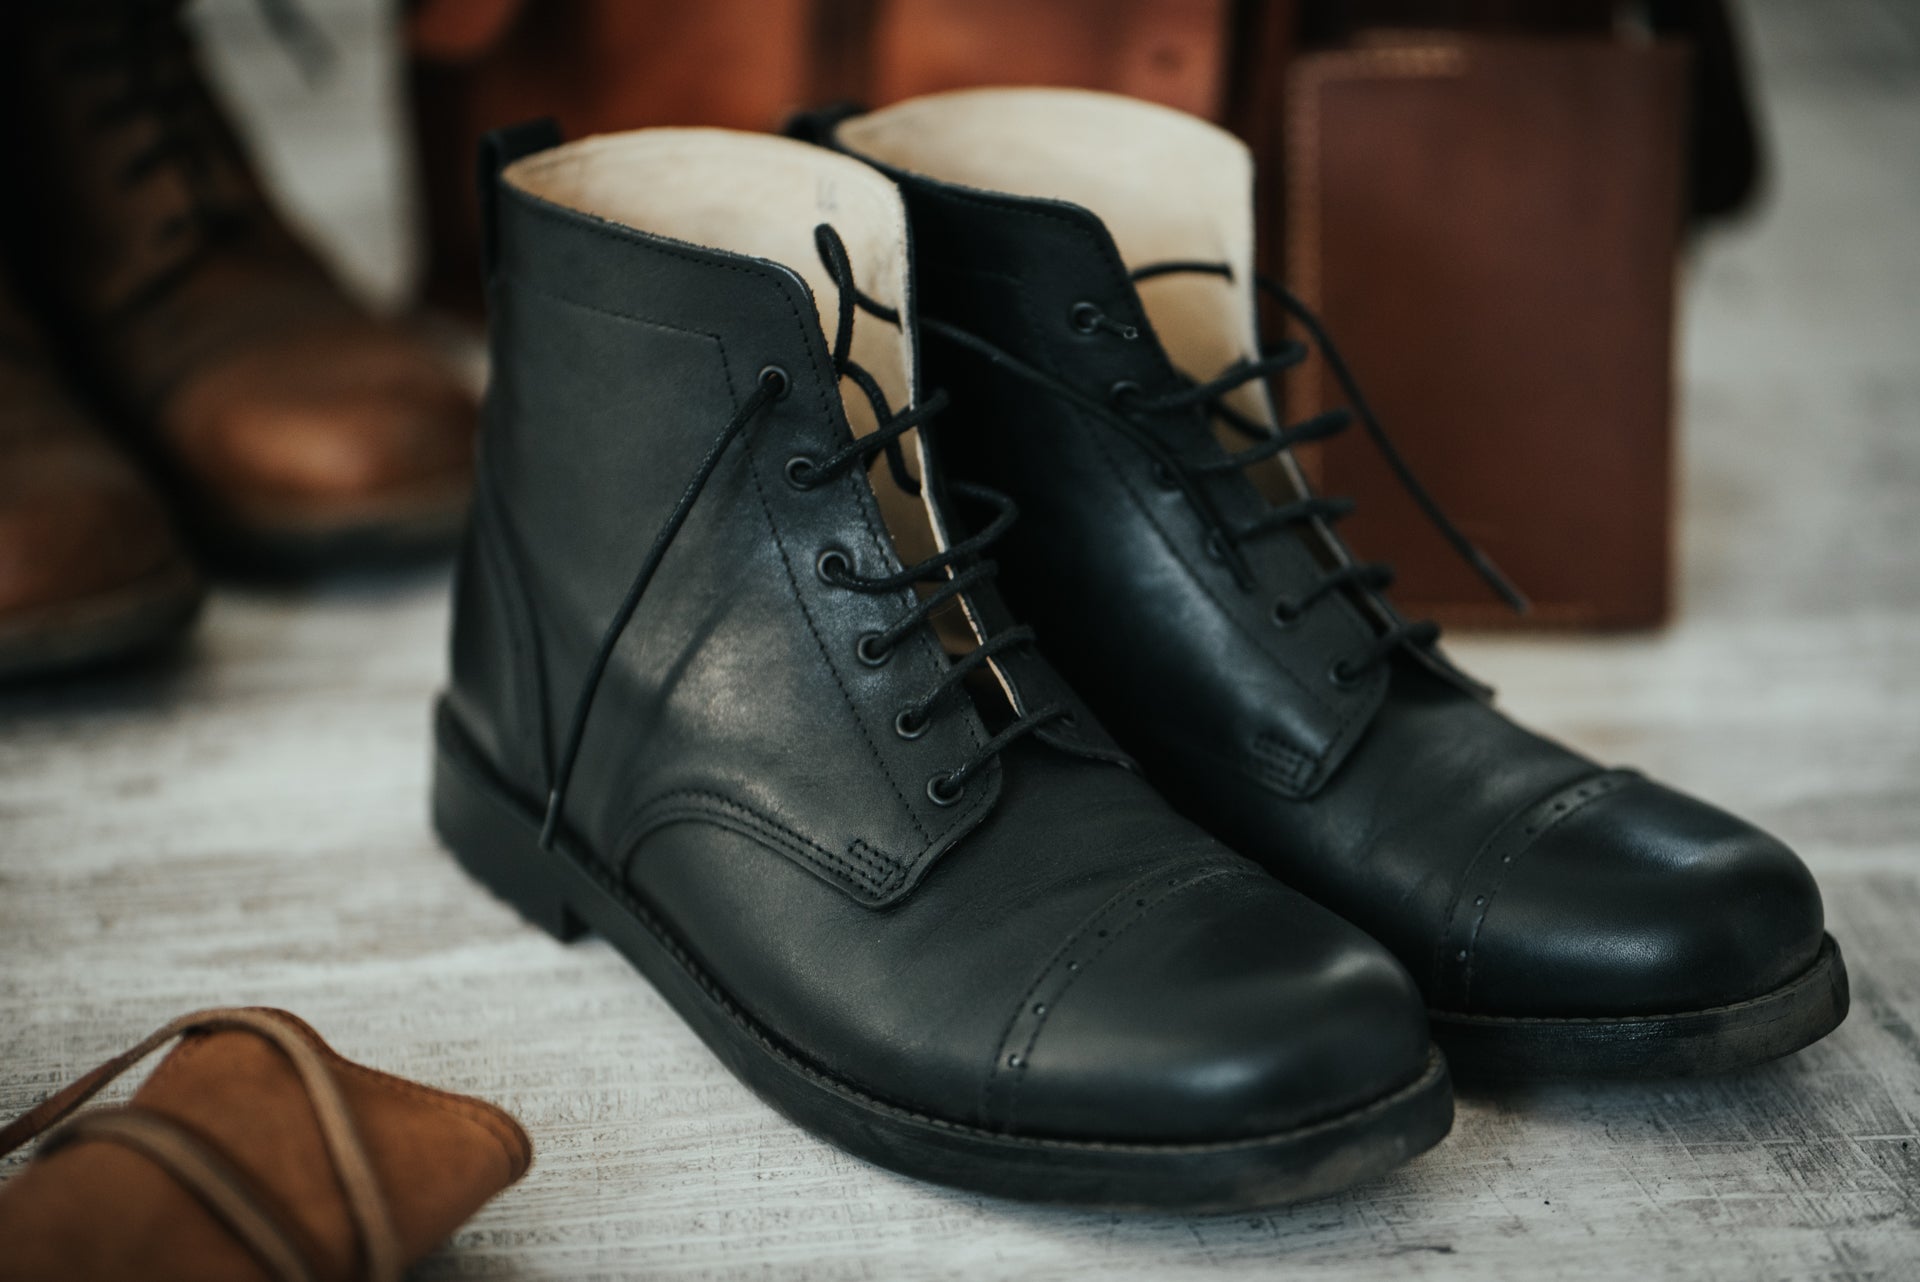 Tejo Black Boots - OldMulla - Boots Store, Handmade By George